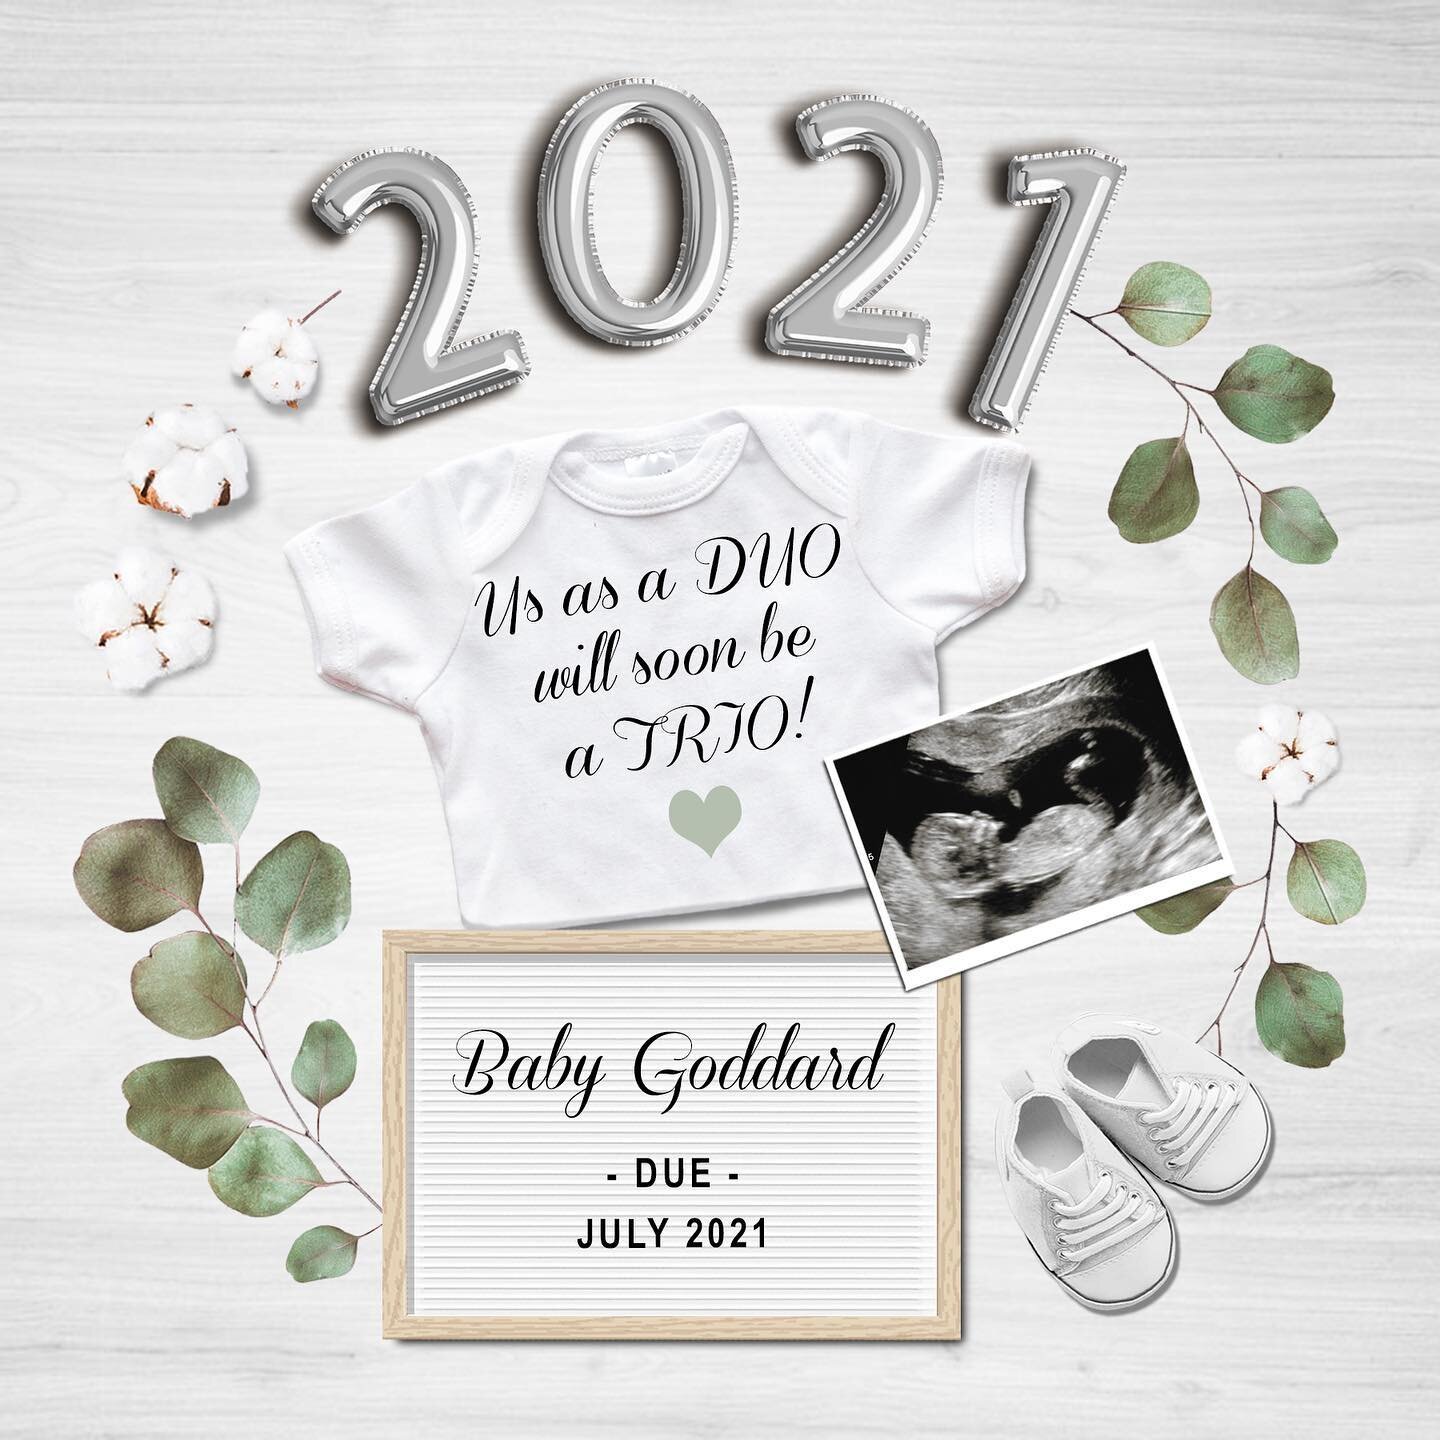 A more personal message to my clients, I&rsquo;m delighted to share some exciting news that I&rsquo;m expecting a baby in July 2021! 🥰